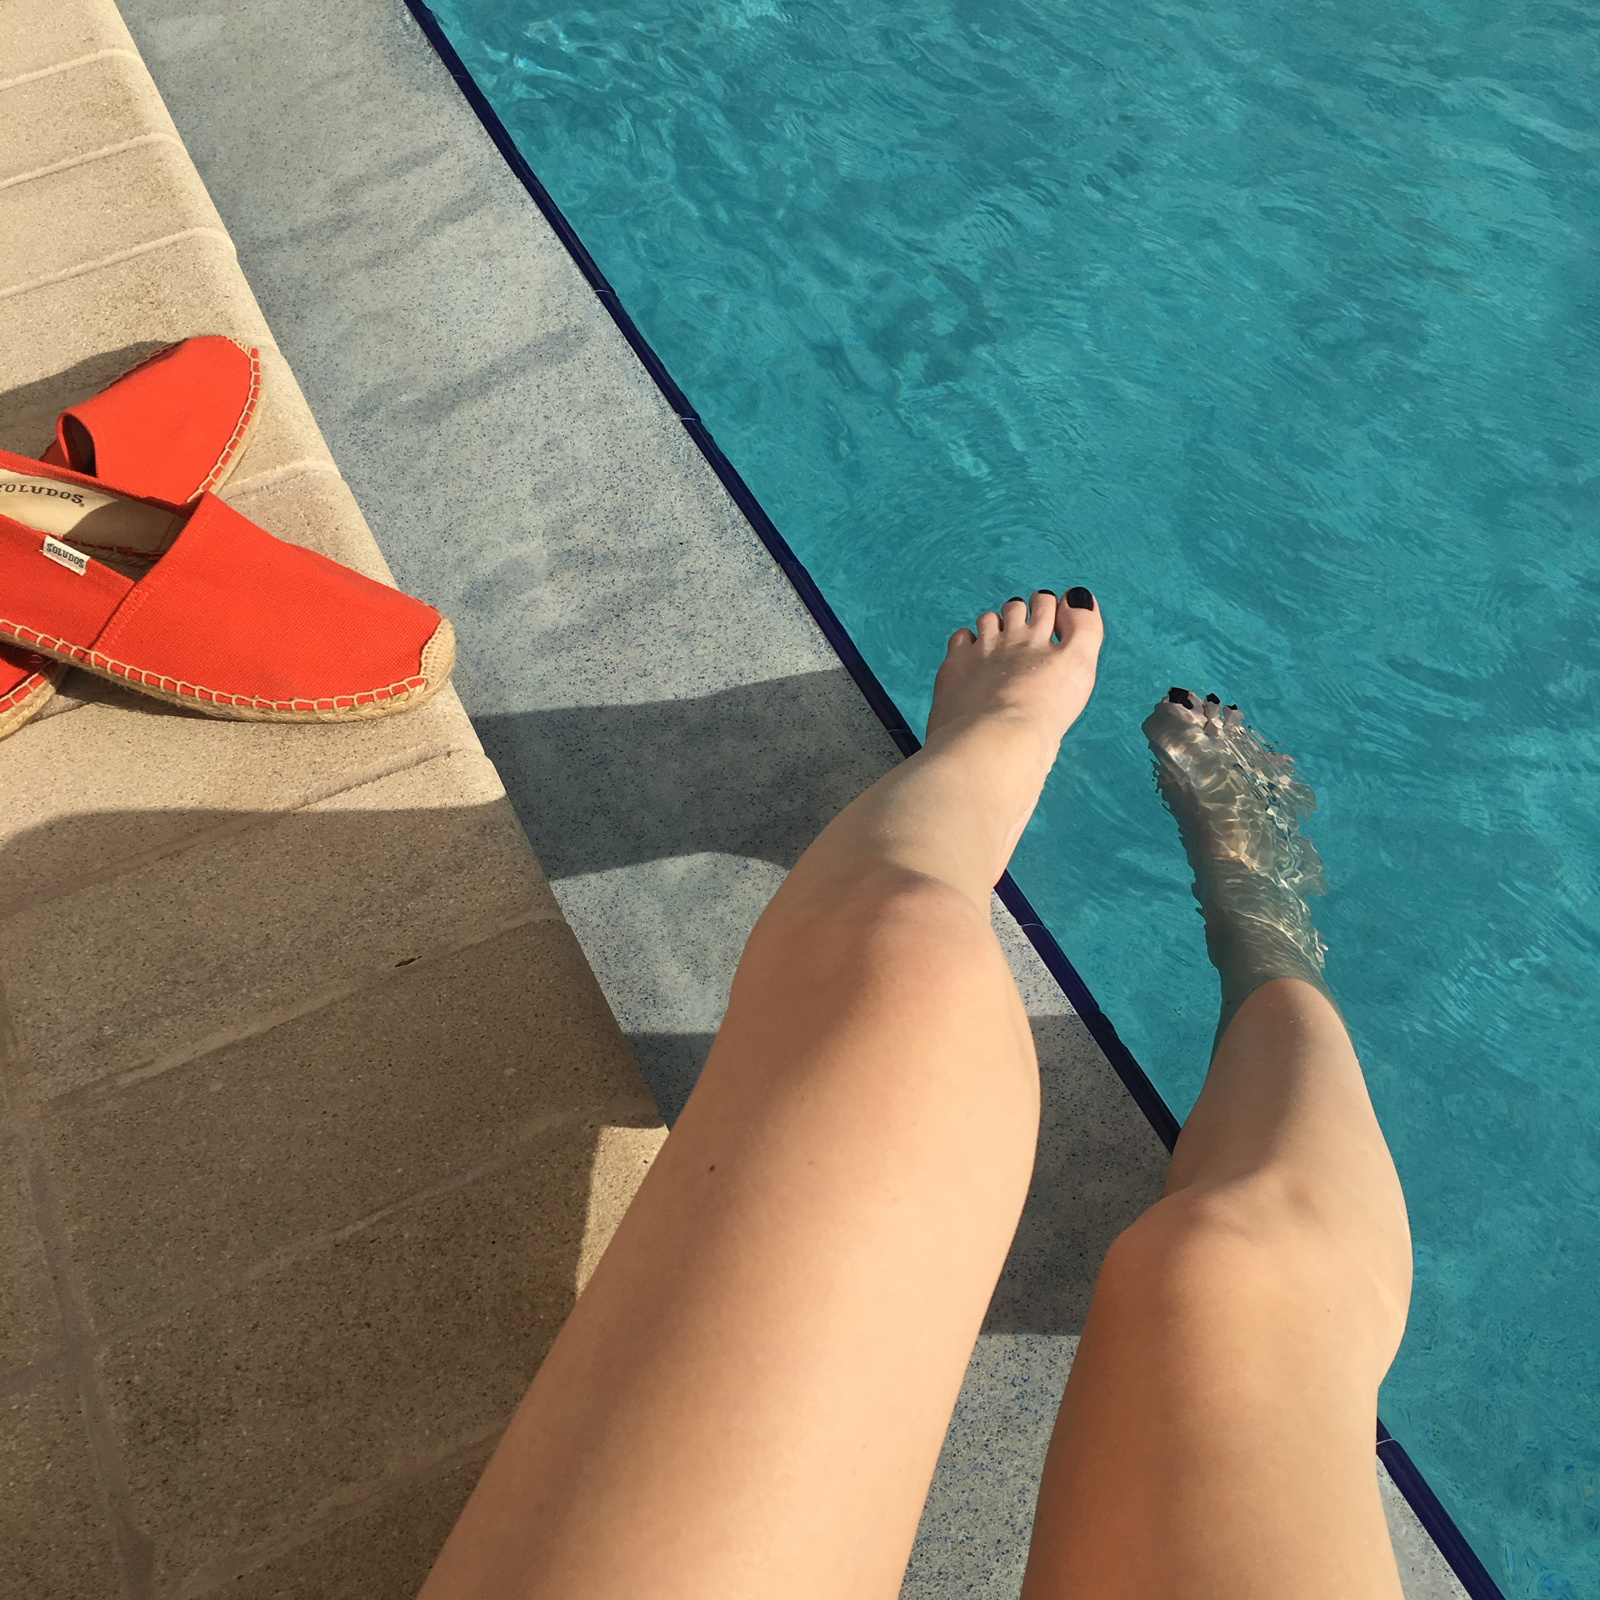 Legs dipped by a poolside